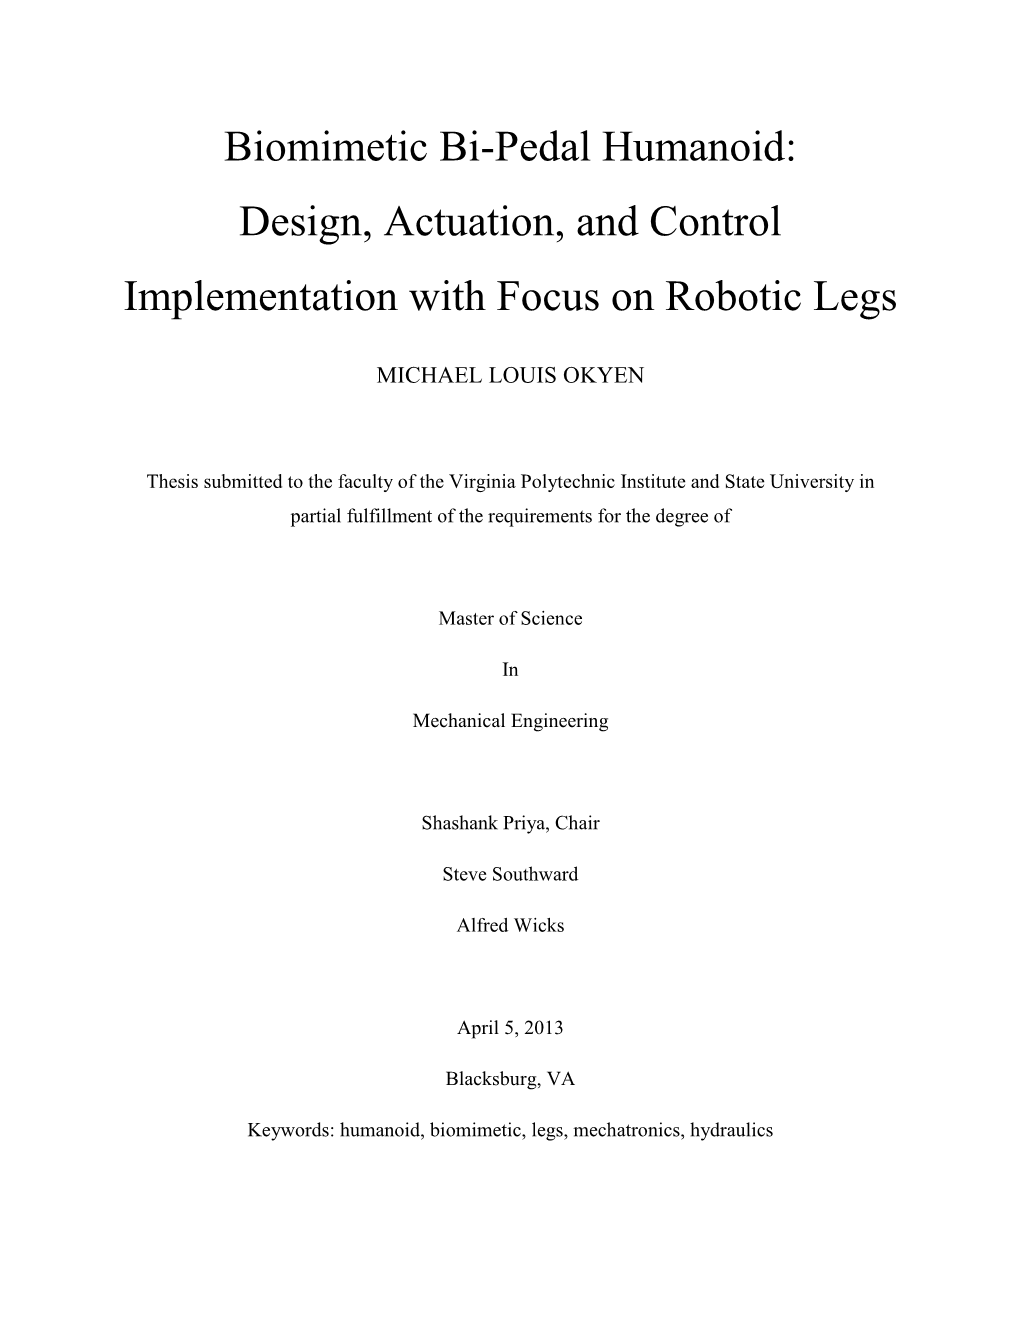 Biomimetic Bi-Pedal Humanoid: Design, Actuation, and Control Implementation with Focus on Robotic Legs